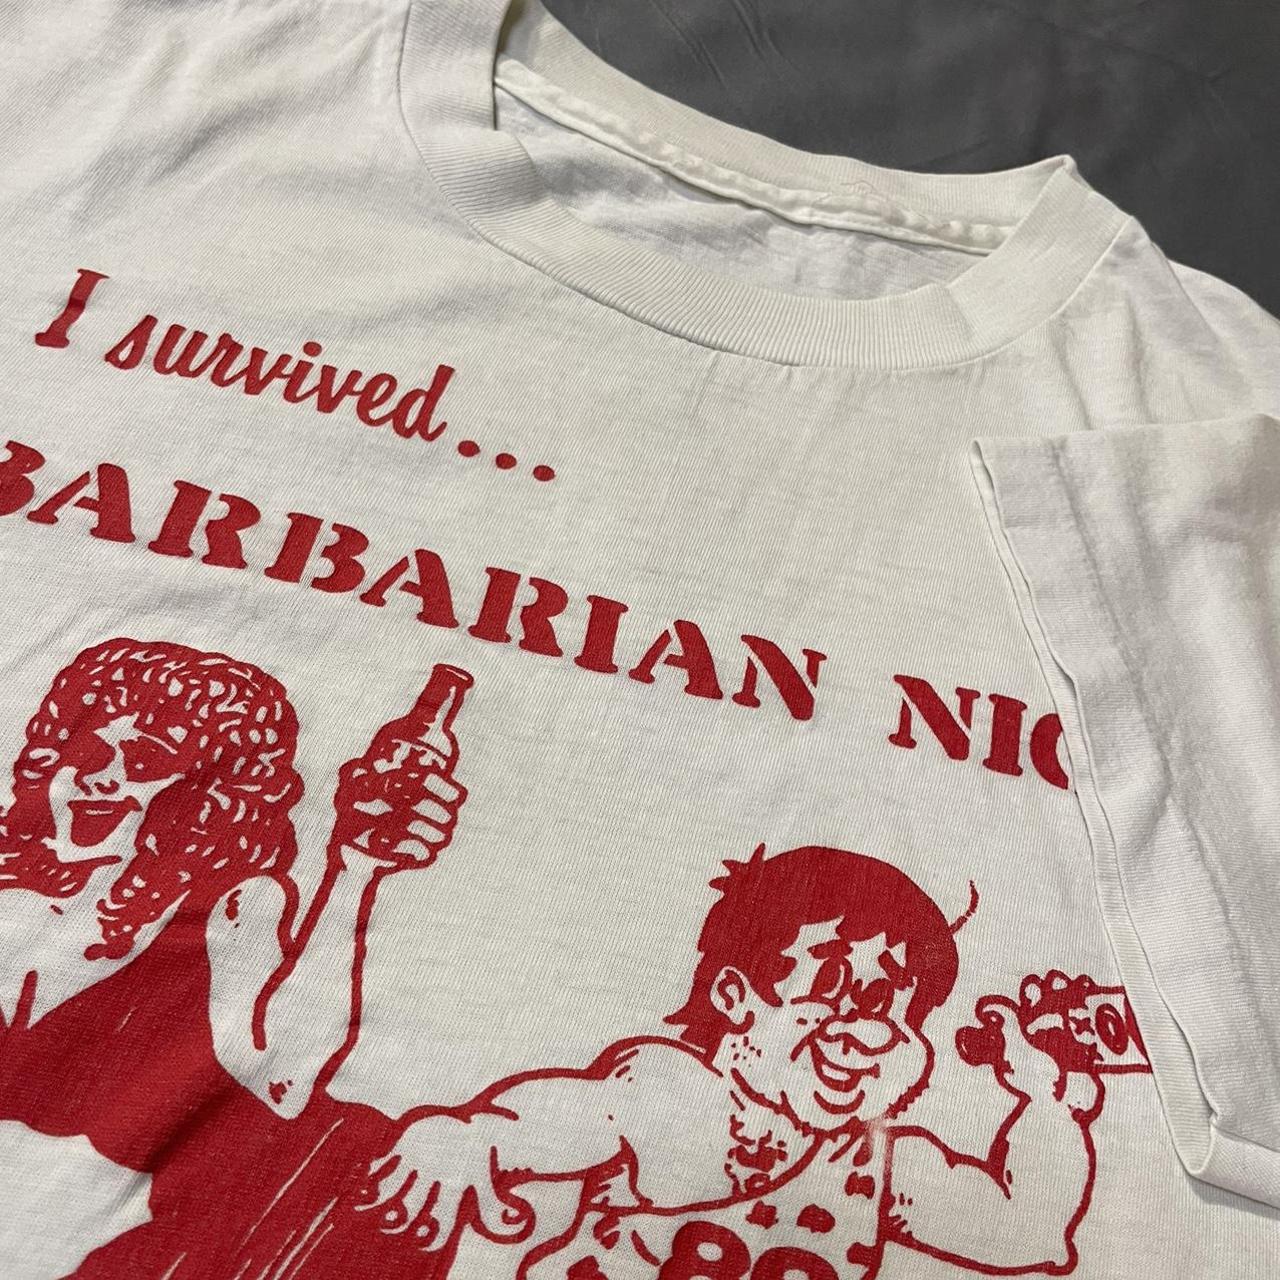 Barbarian Men's White and Red T-shirt (2)